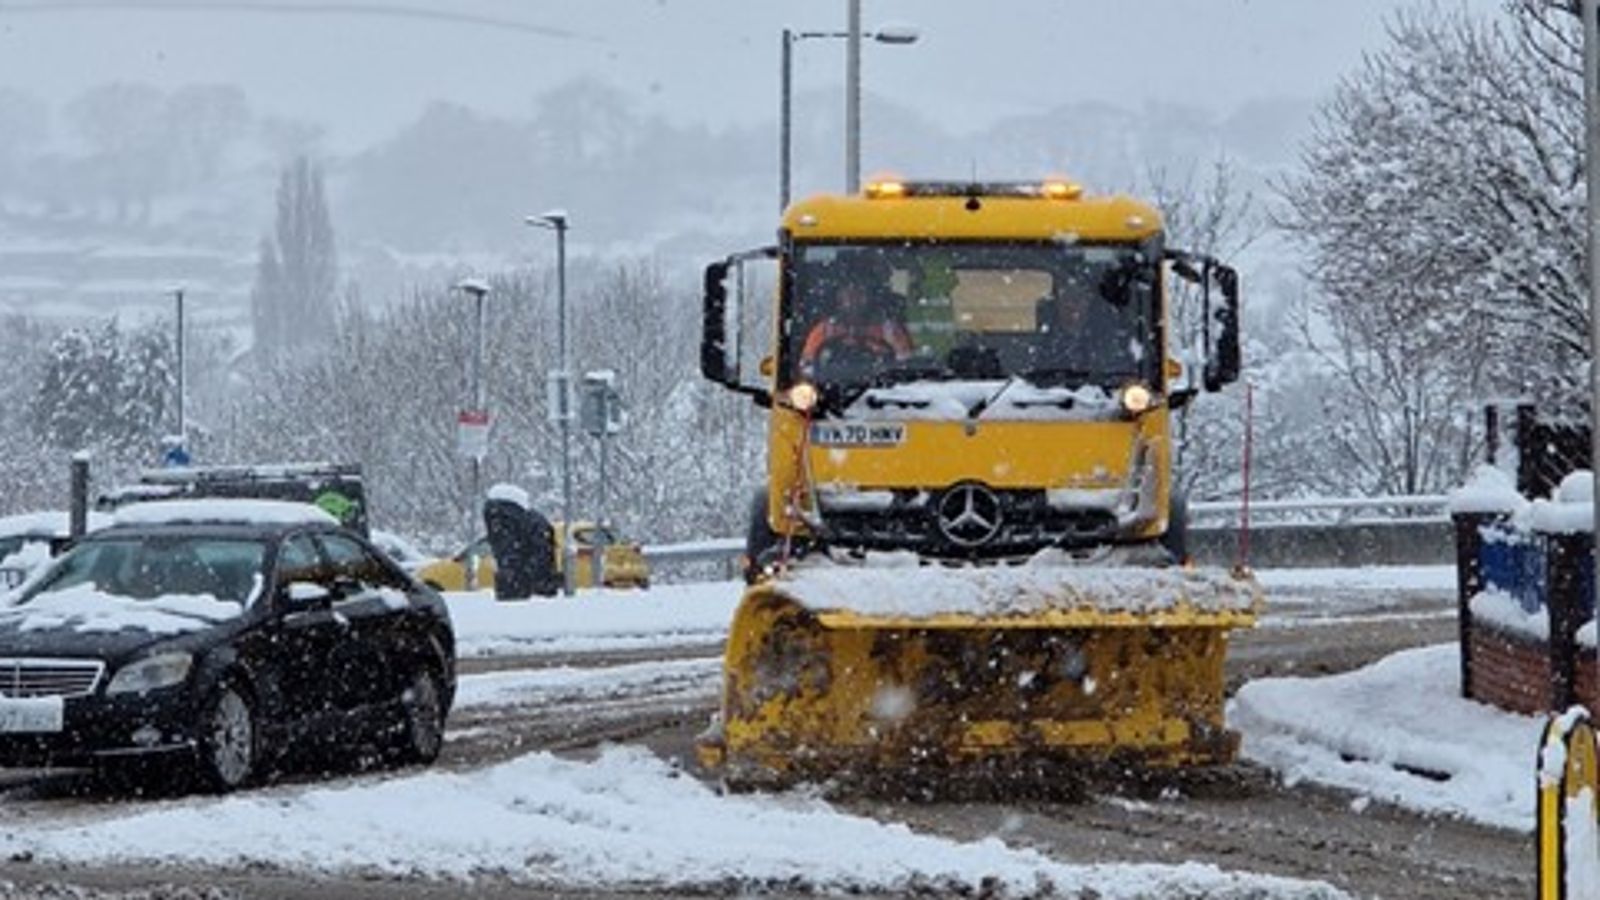 UK weather: 'Treacherous conditions' wreak havoc on travel - with more blizzards on the way